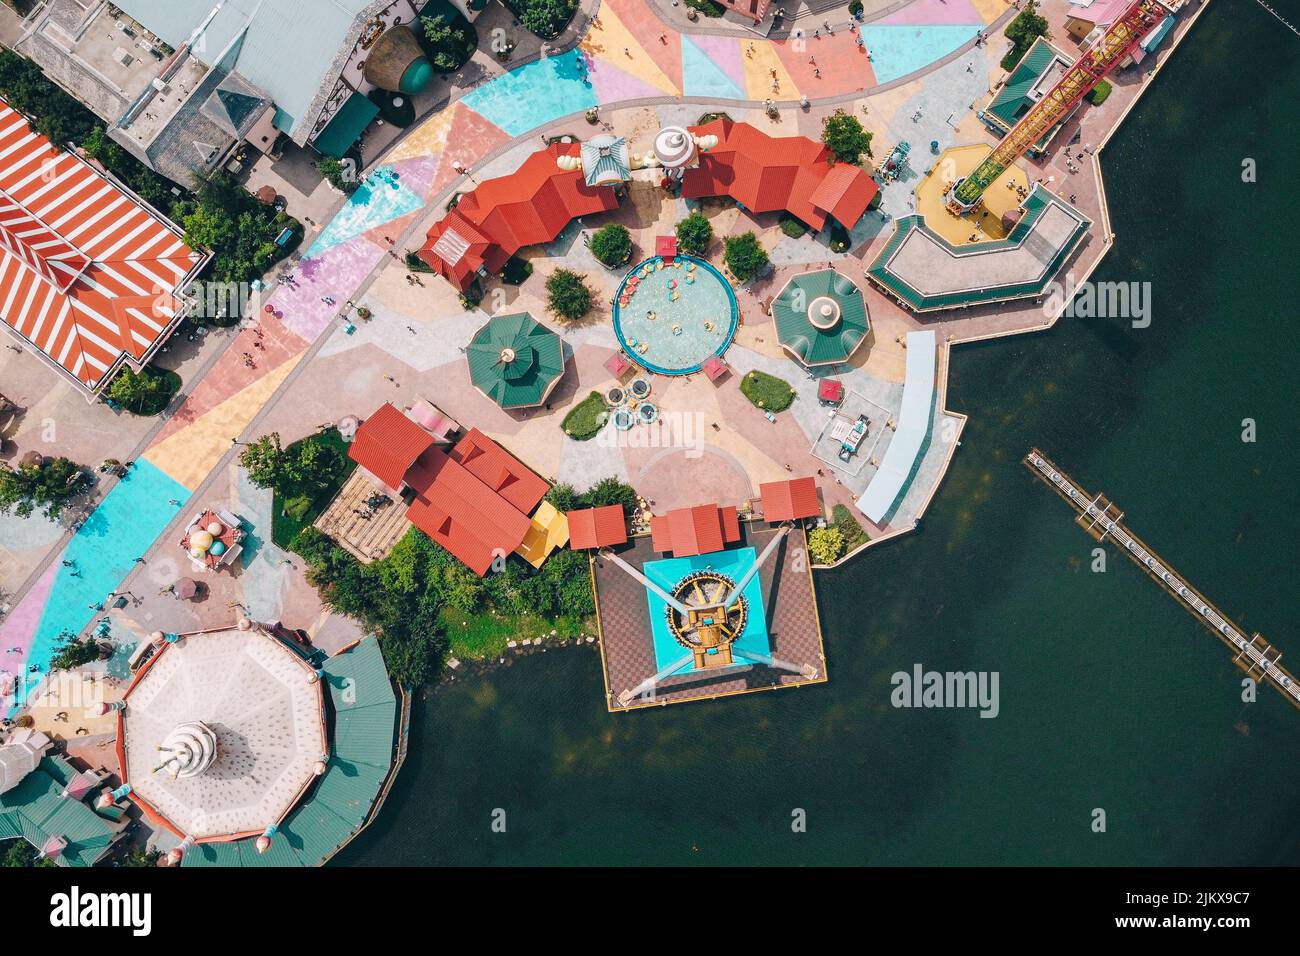 A bird's eye view of a colorful park by the water Stock Photo